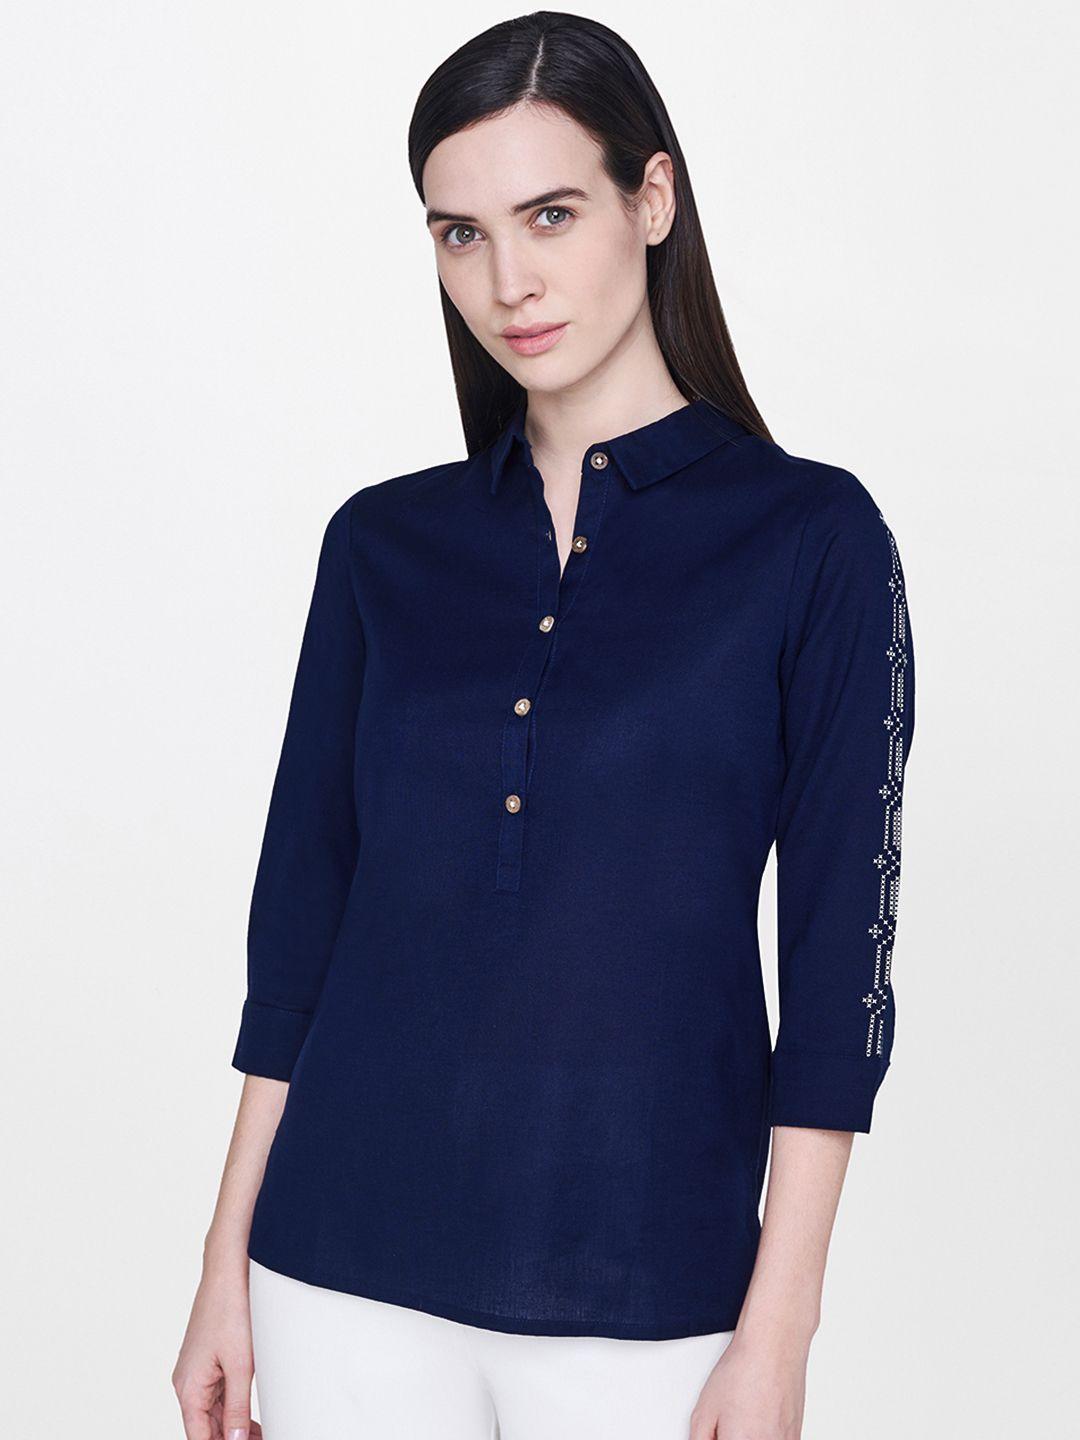 and-women-navy-blue-solid-shirt-style-top